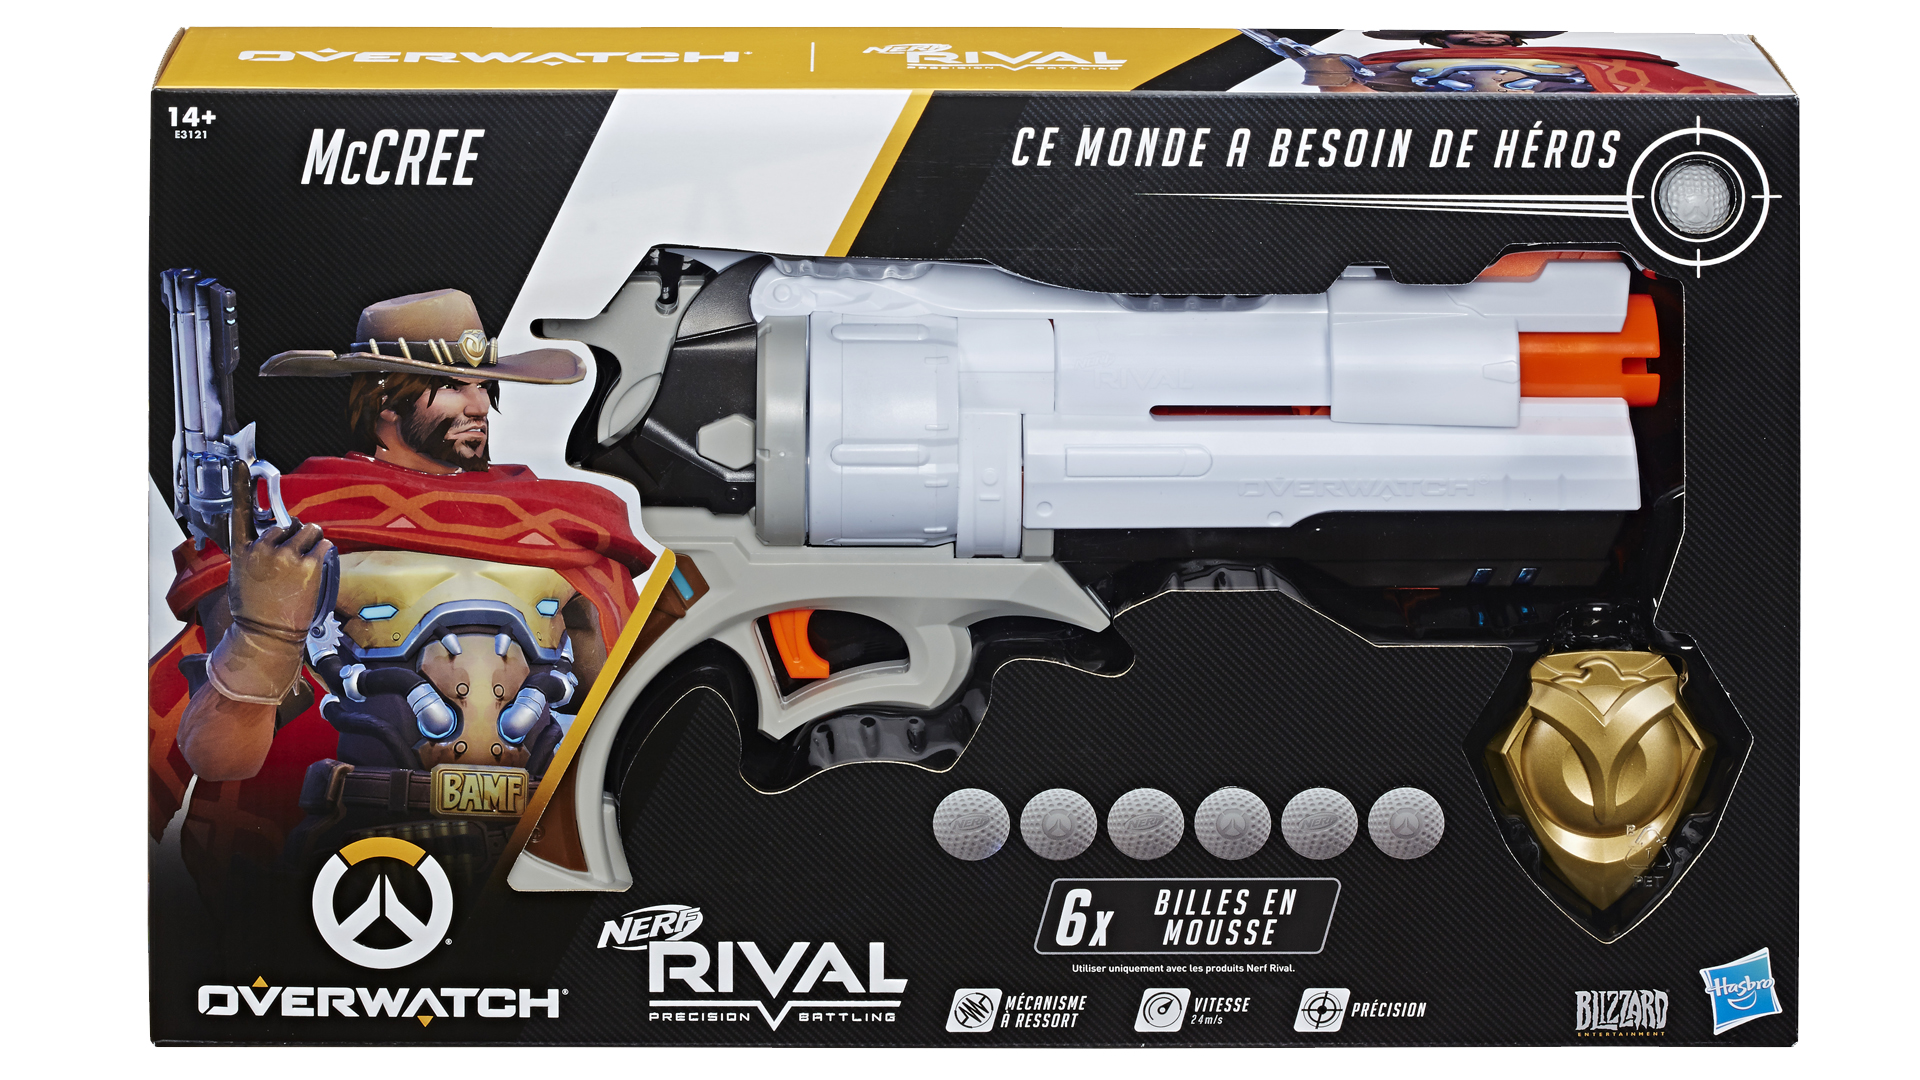 mccree-arme-overwatch-nerf-pacificateur